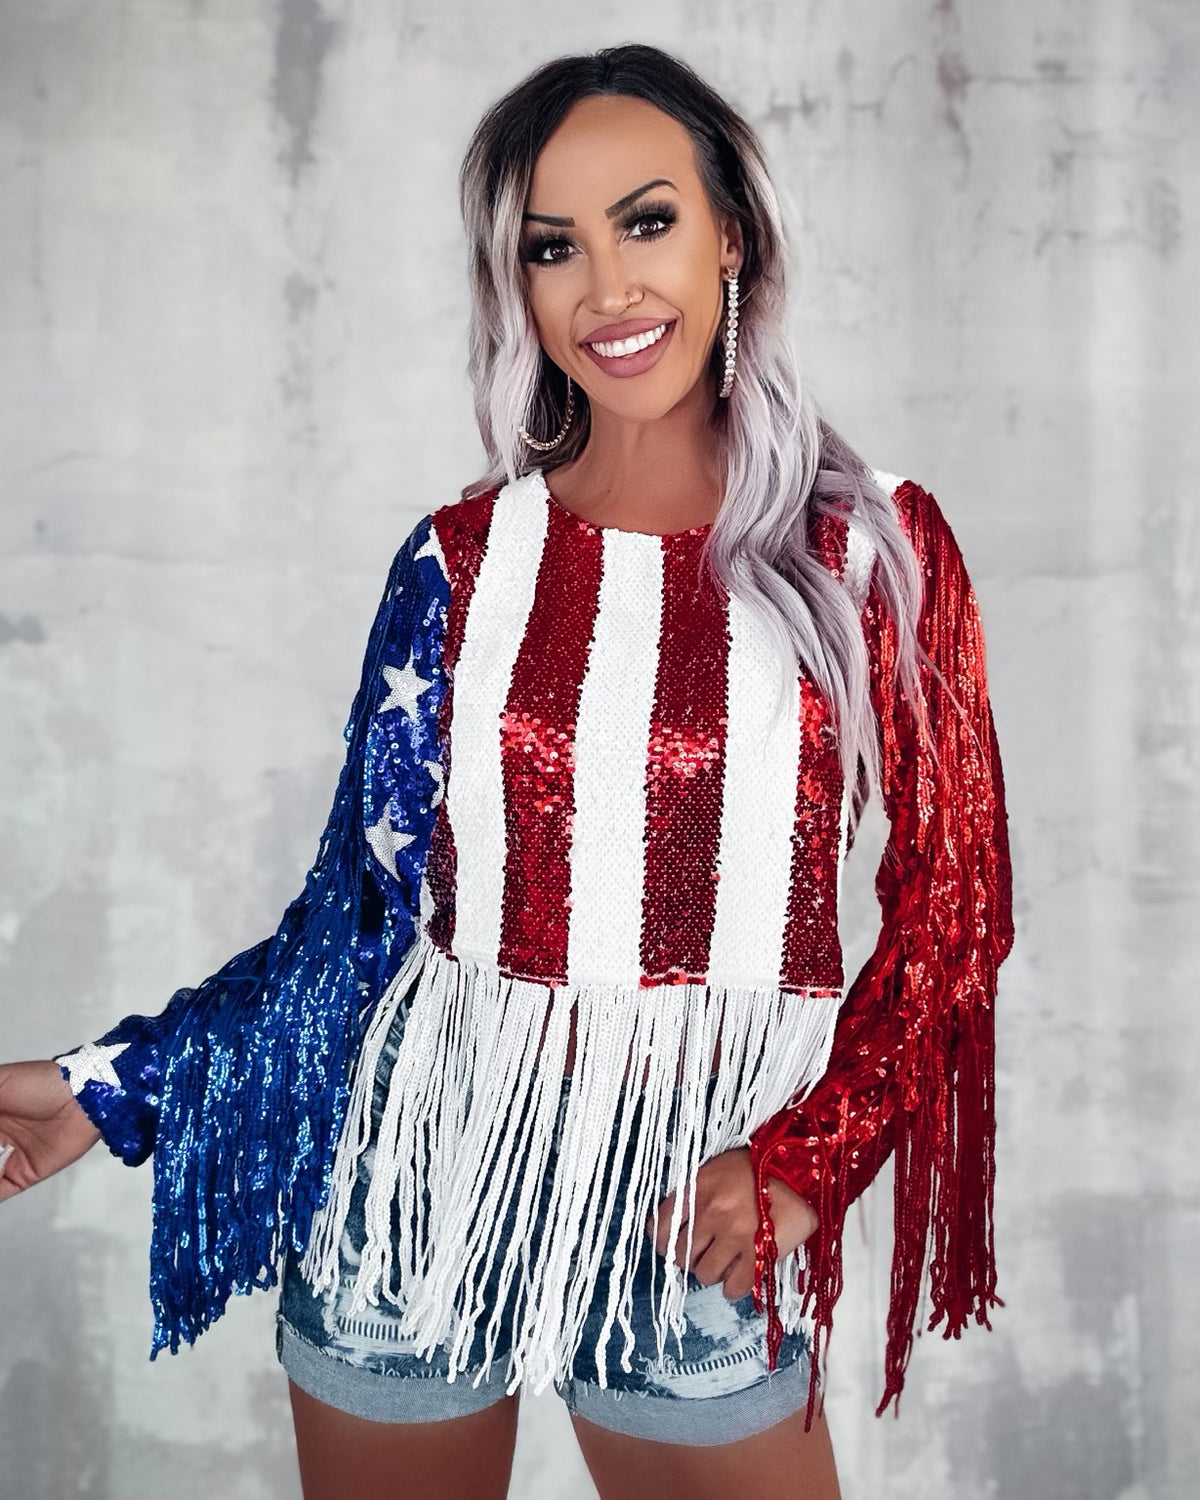 USA Sequin Top - Red/White/Blue